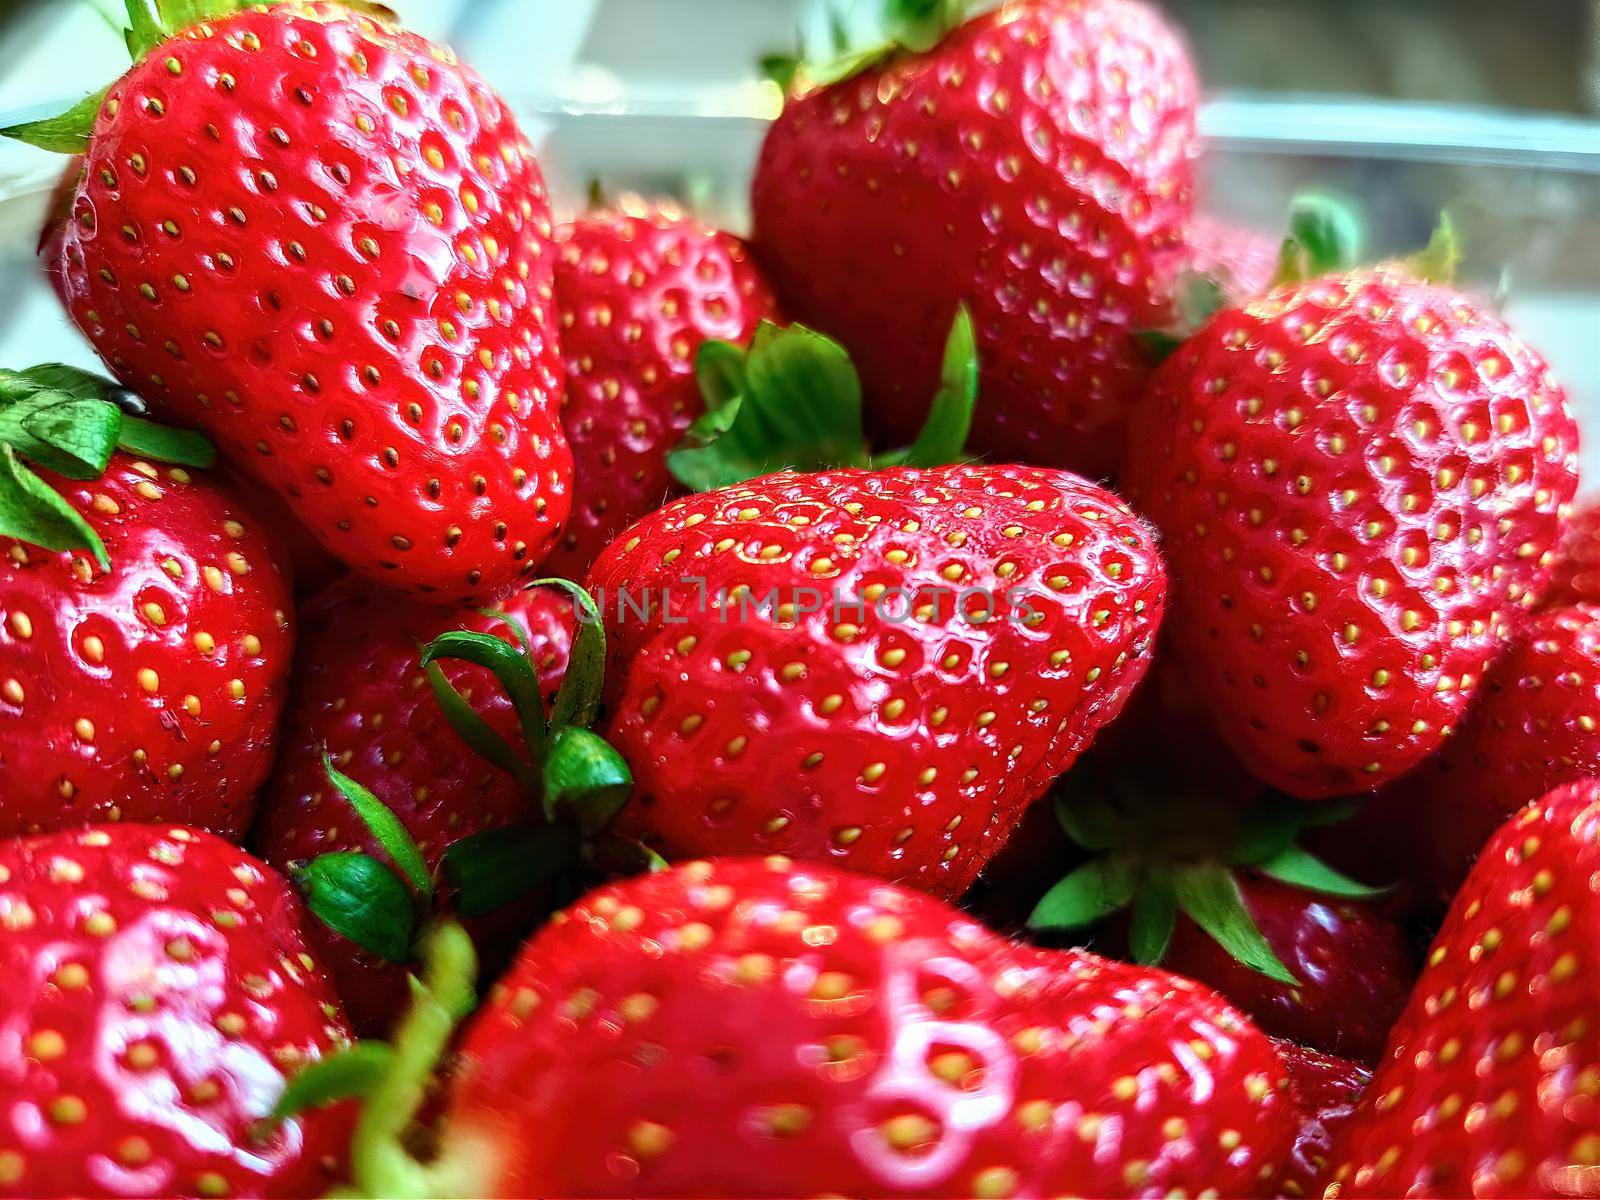 Fresh juicy strawberries with leaves. Strawberry. close up view by Nickstock